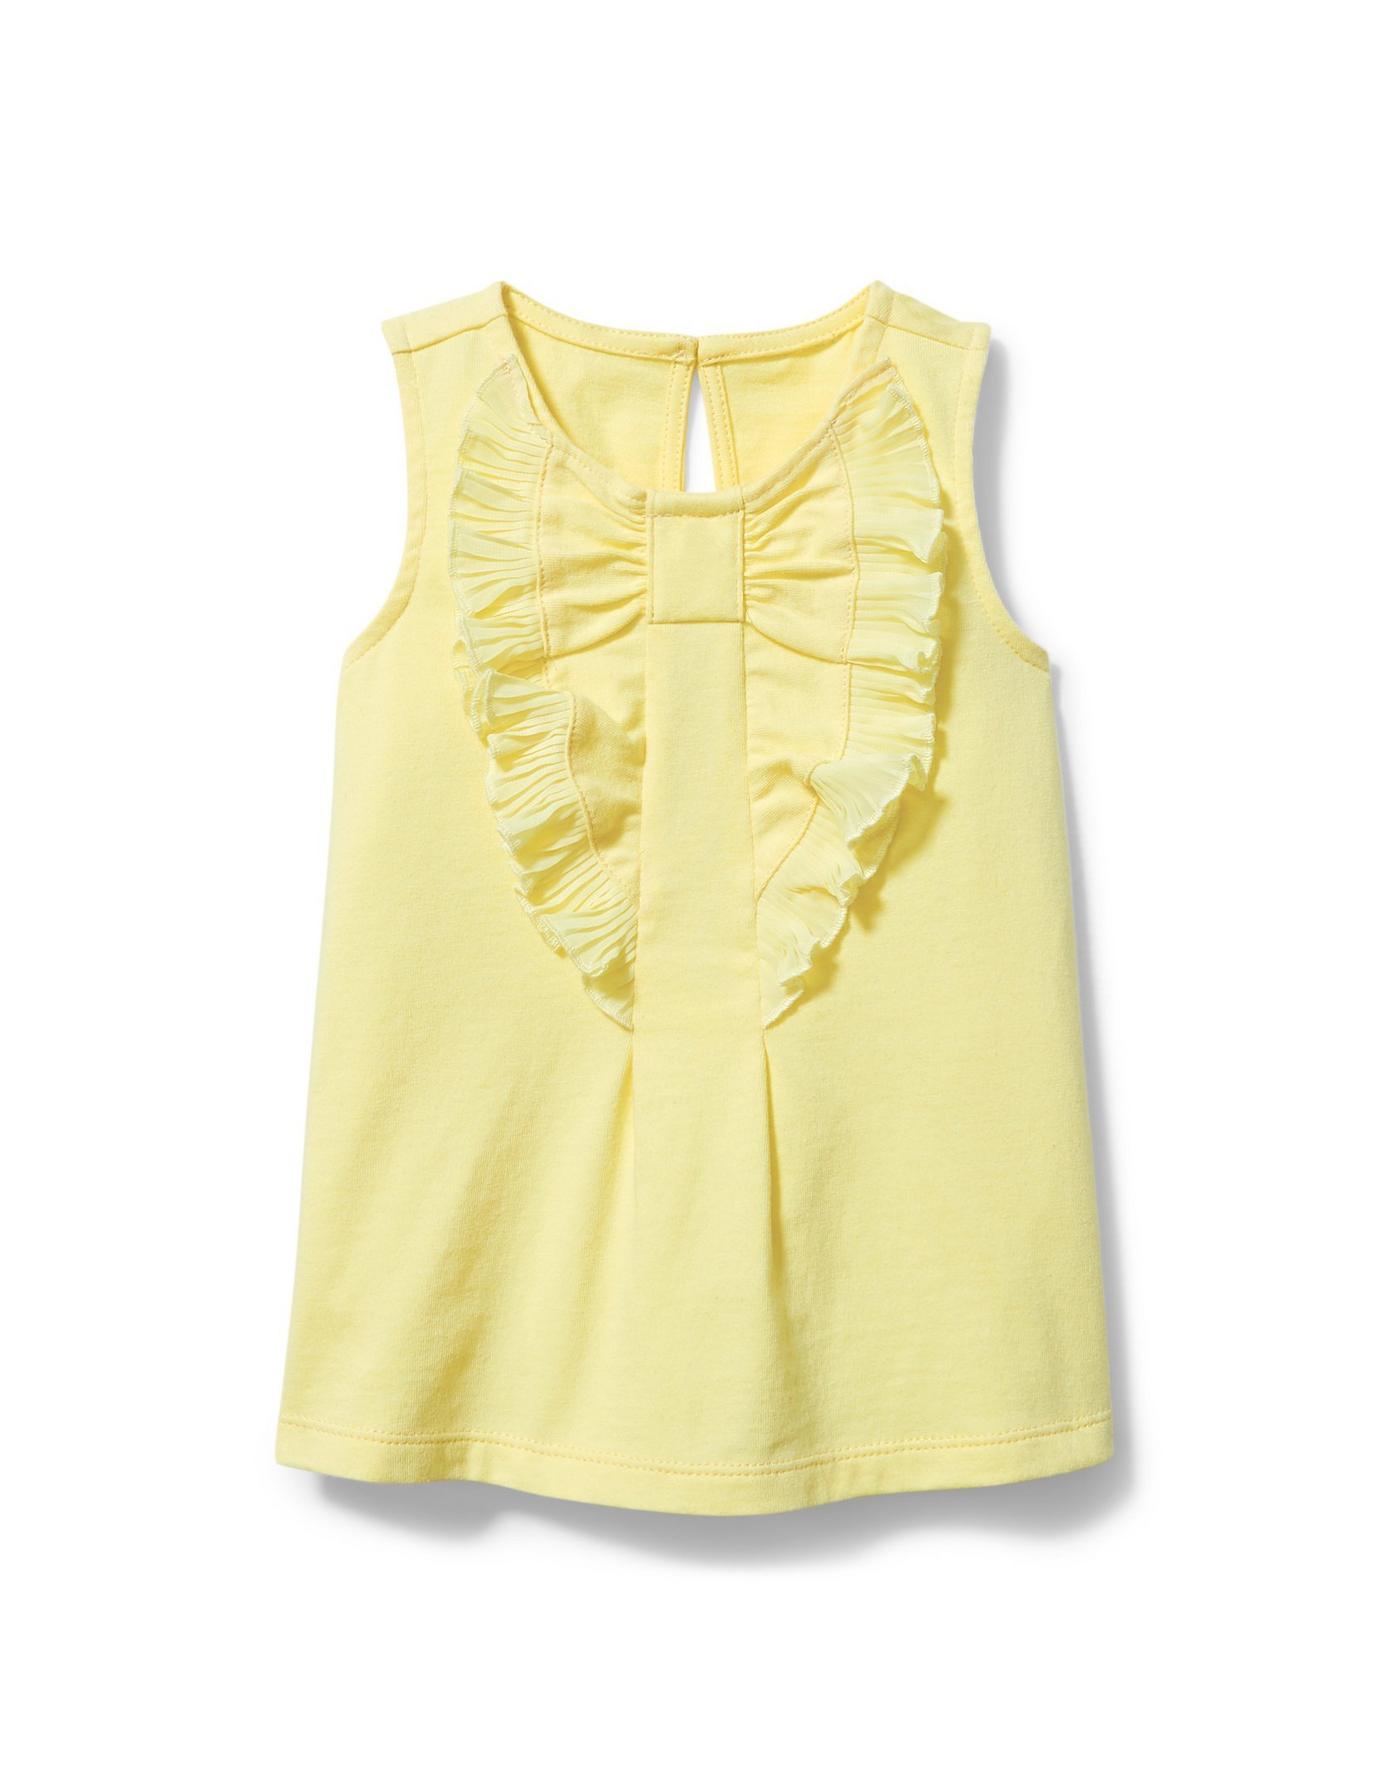 sibling matches for summer, girls yellow tank